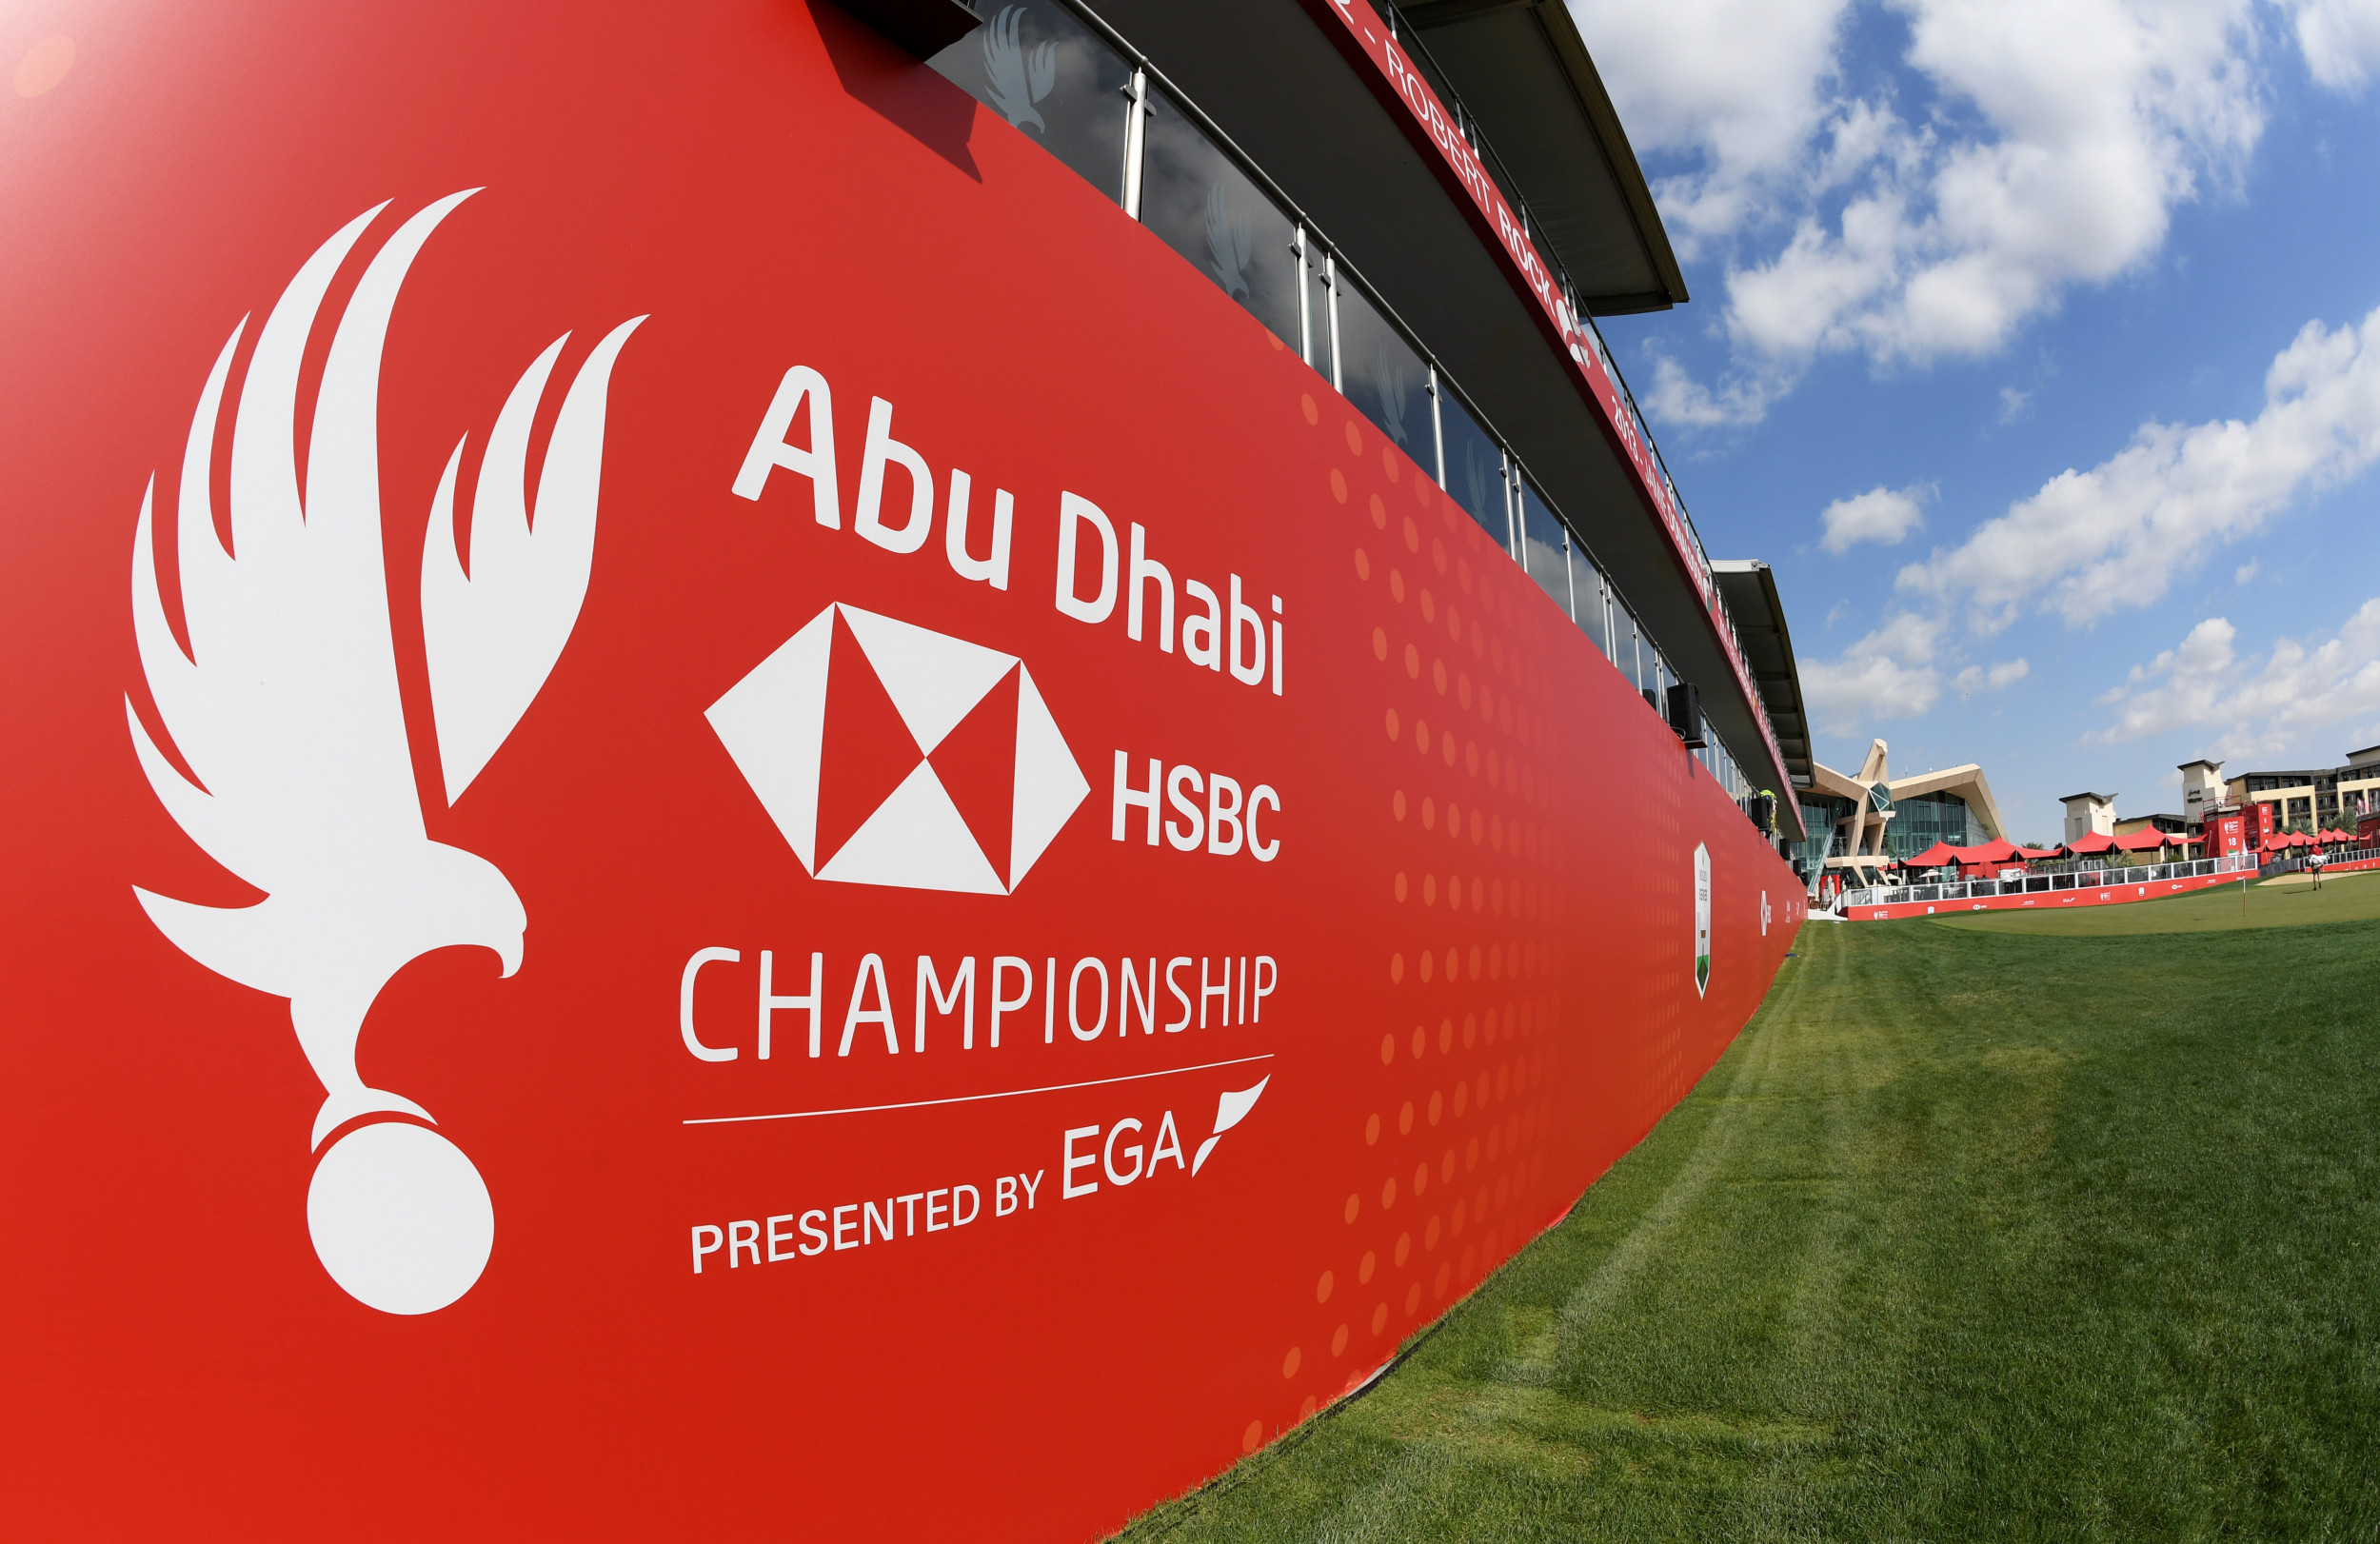 Abu Dhabi HSBC Championship Where to Watch, Live Stream, TV Channel and Odds